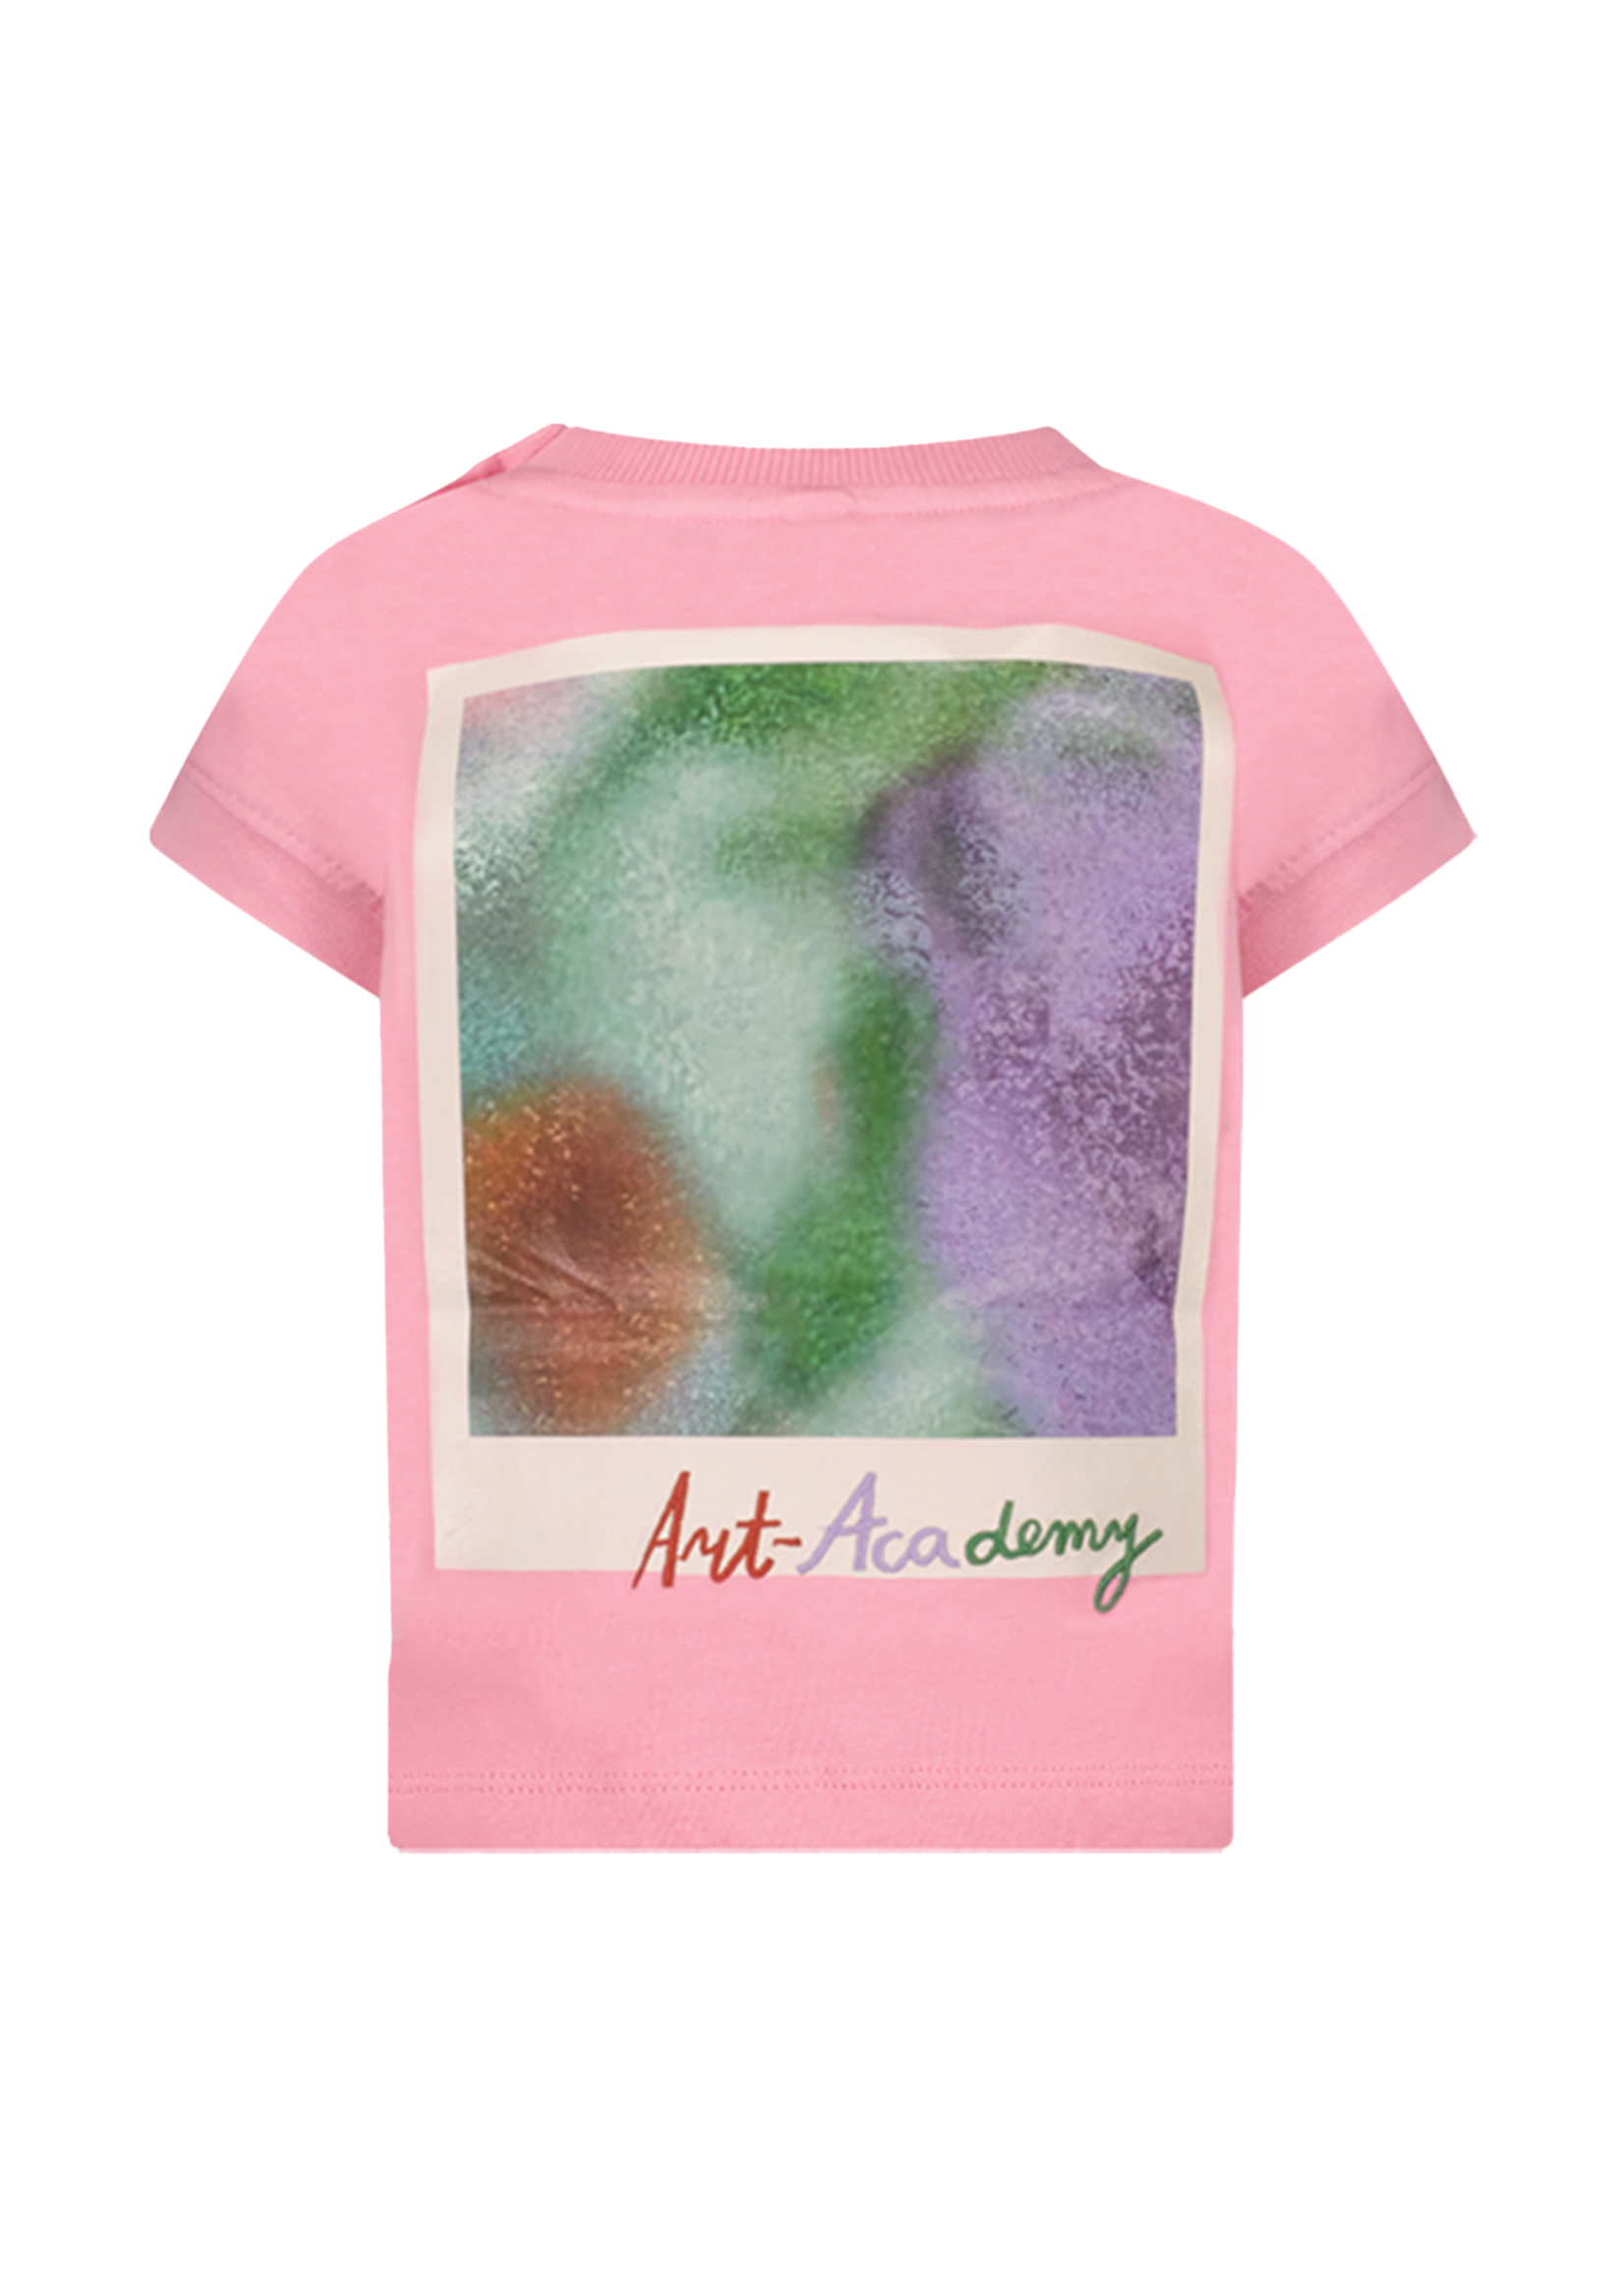 The New Chapter Nikky t-shirt pink sorbet